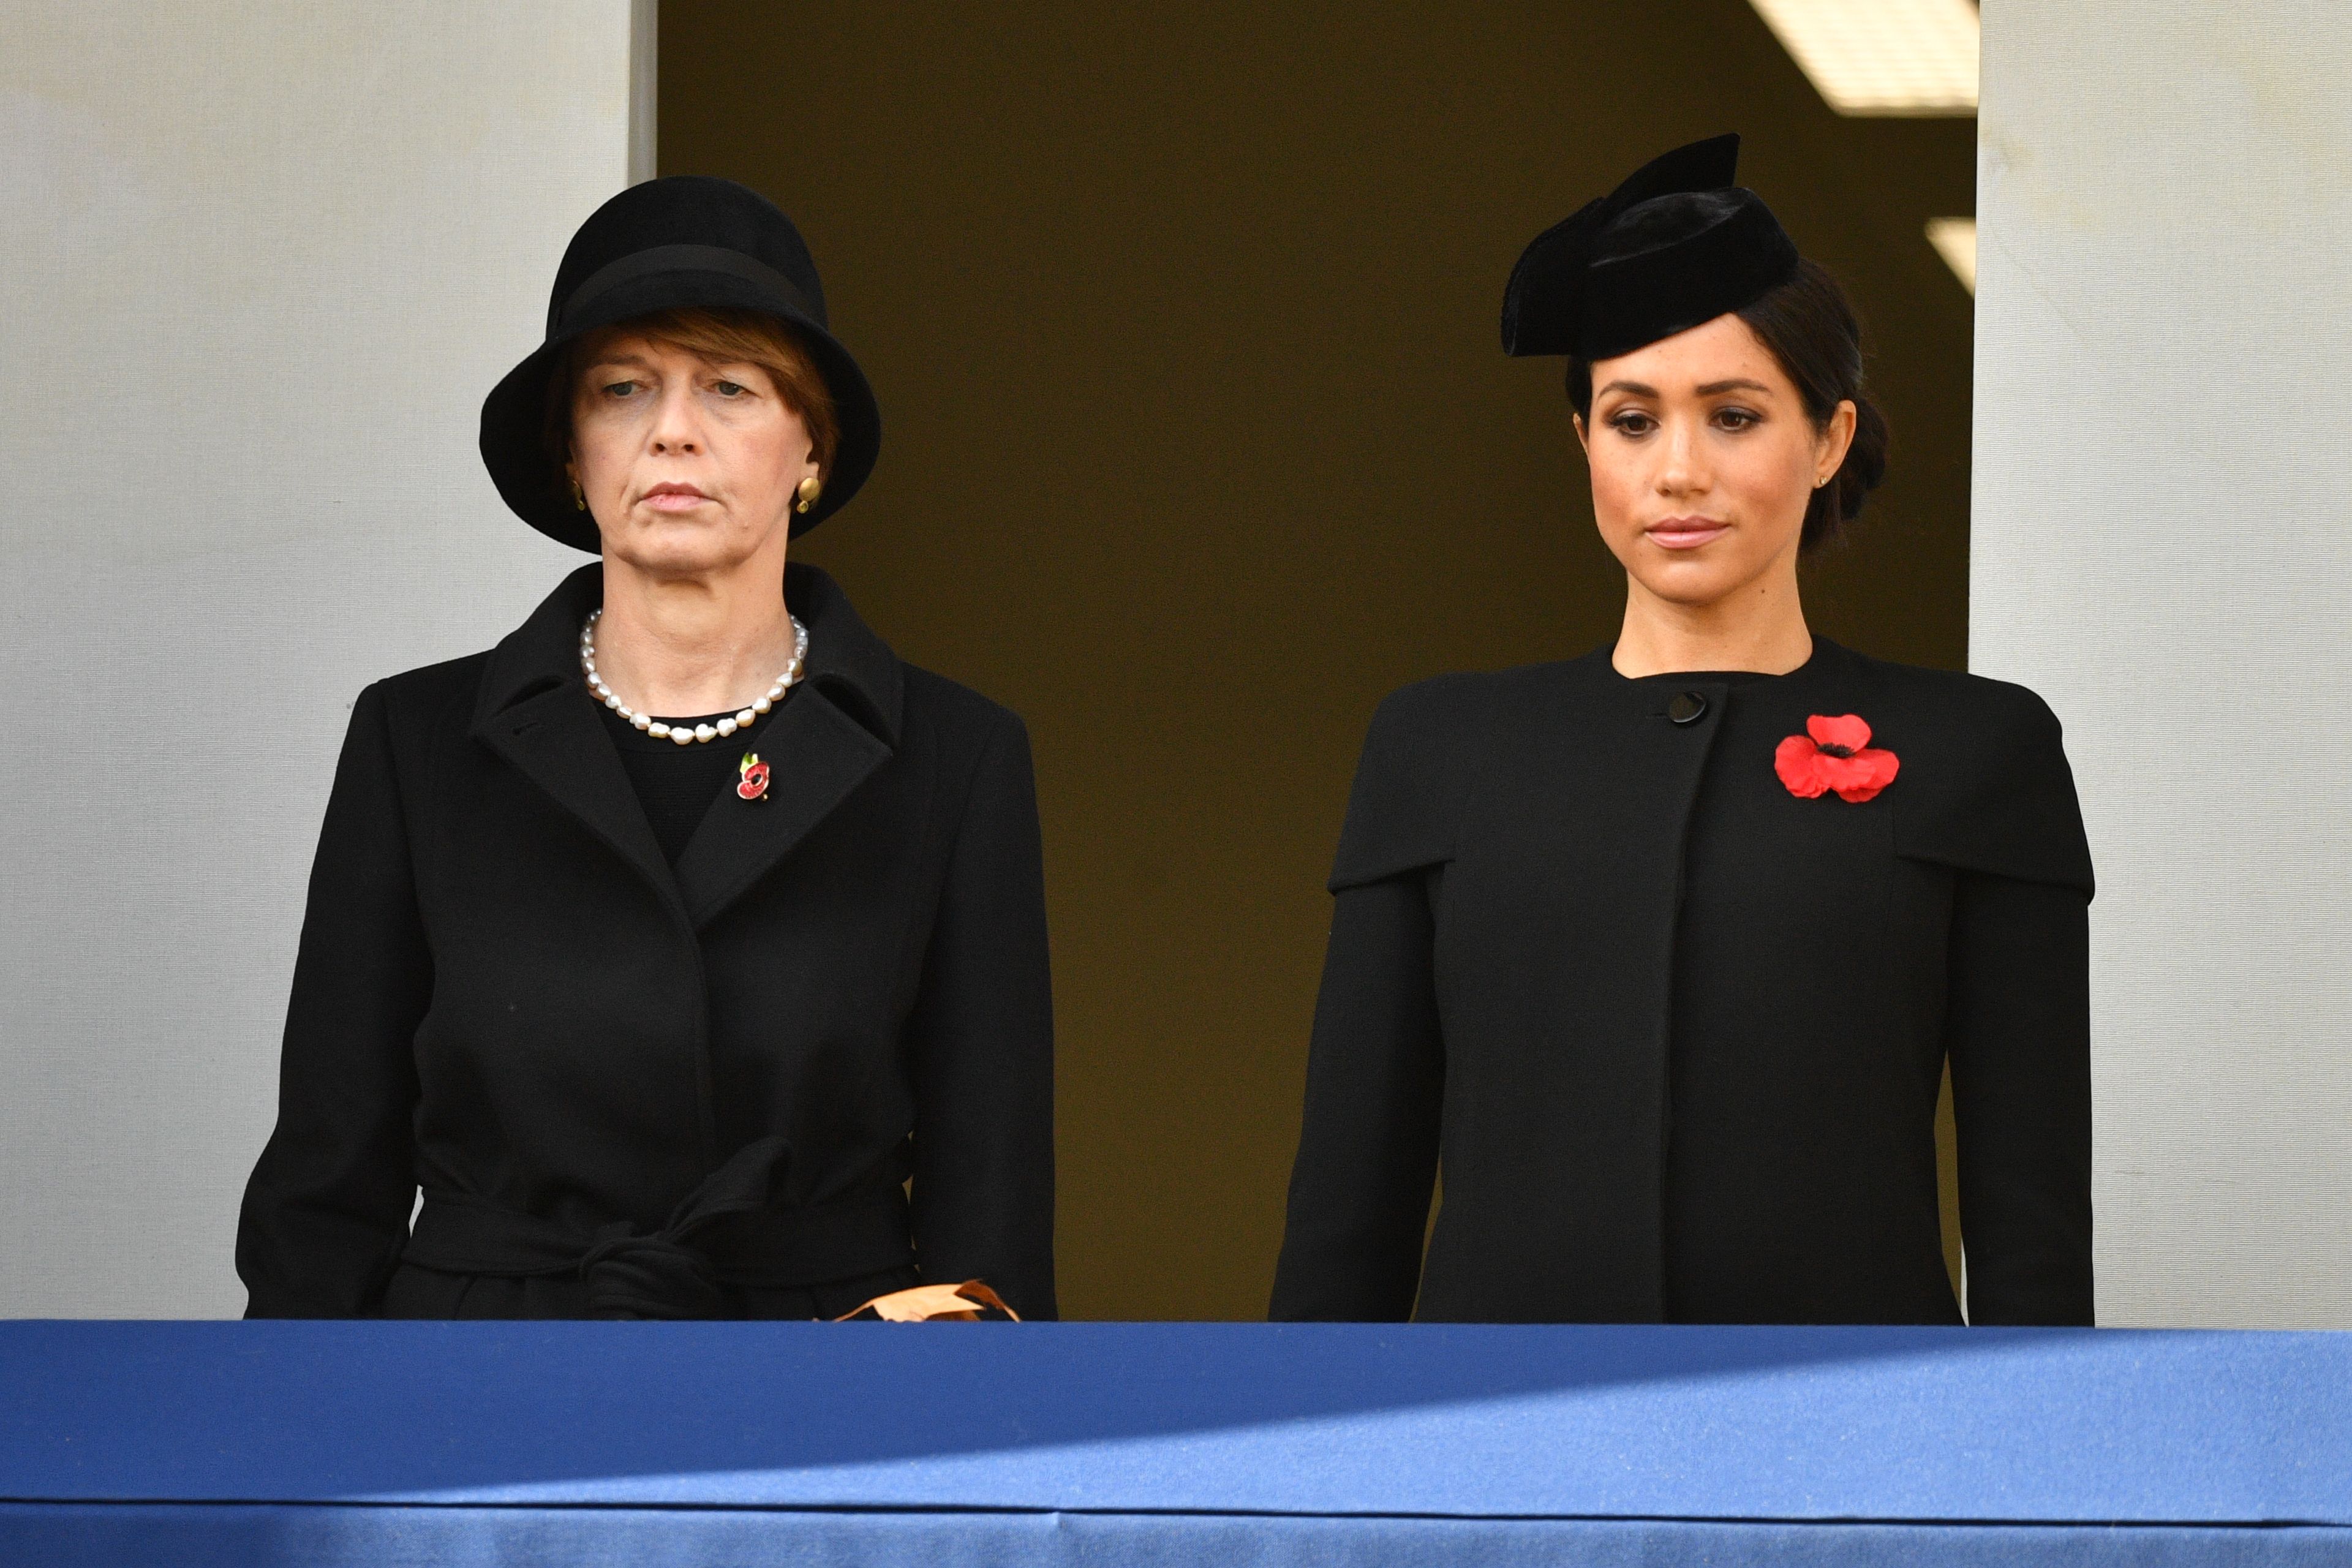 Why Didn't Meghan Markle Sit With The Royal Family On Remembrance Day?